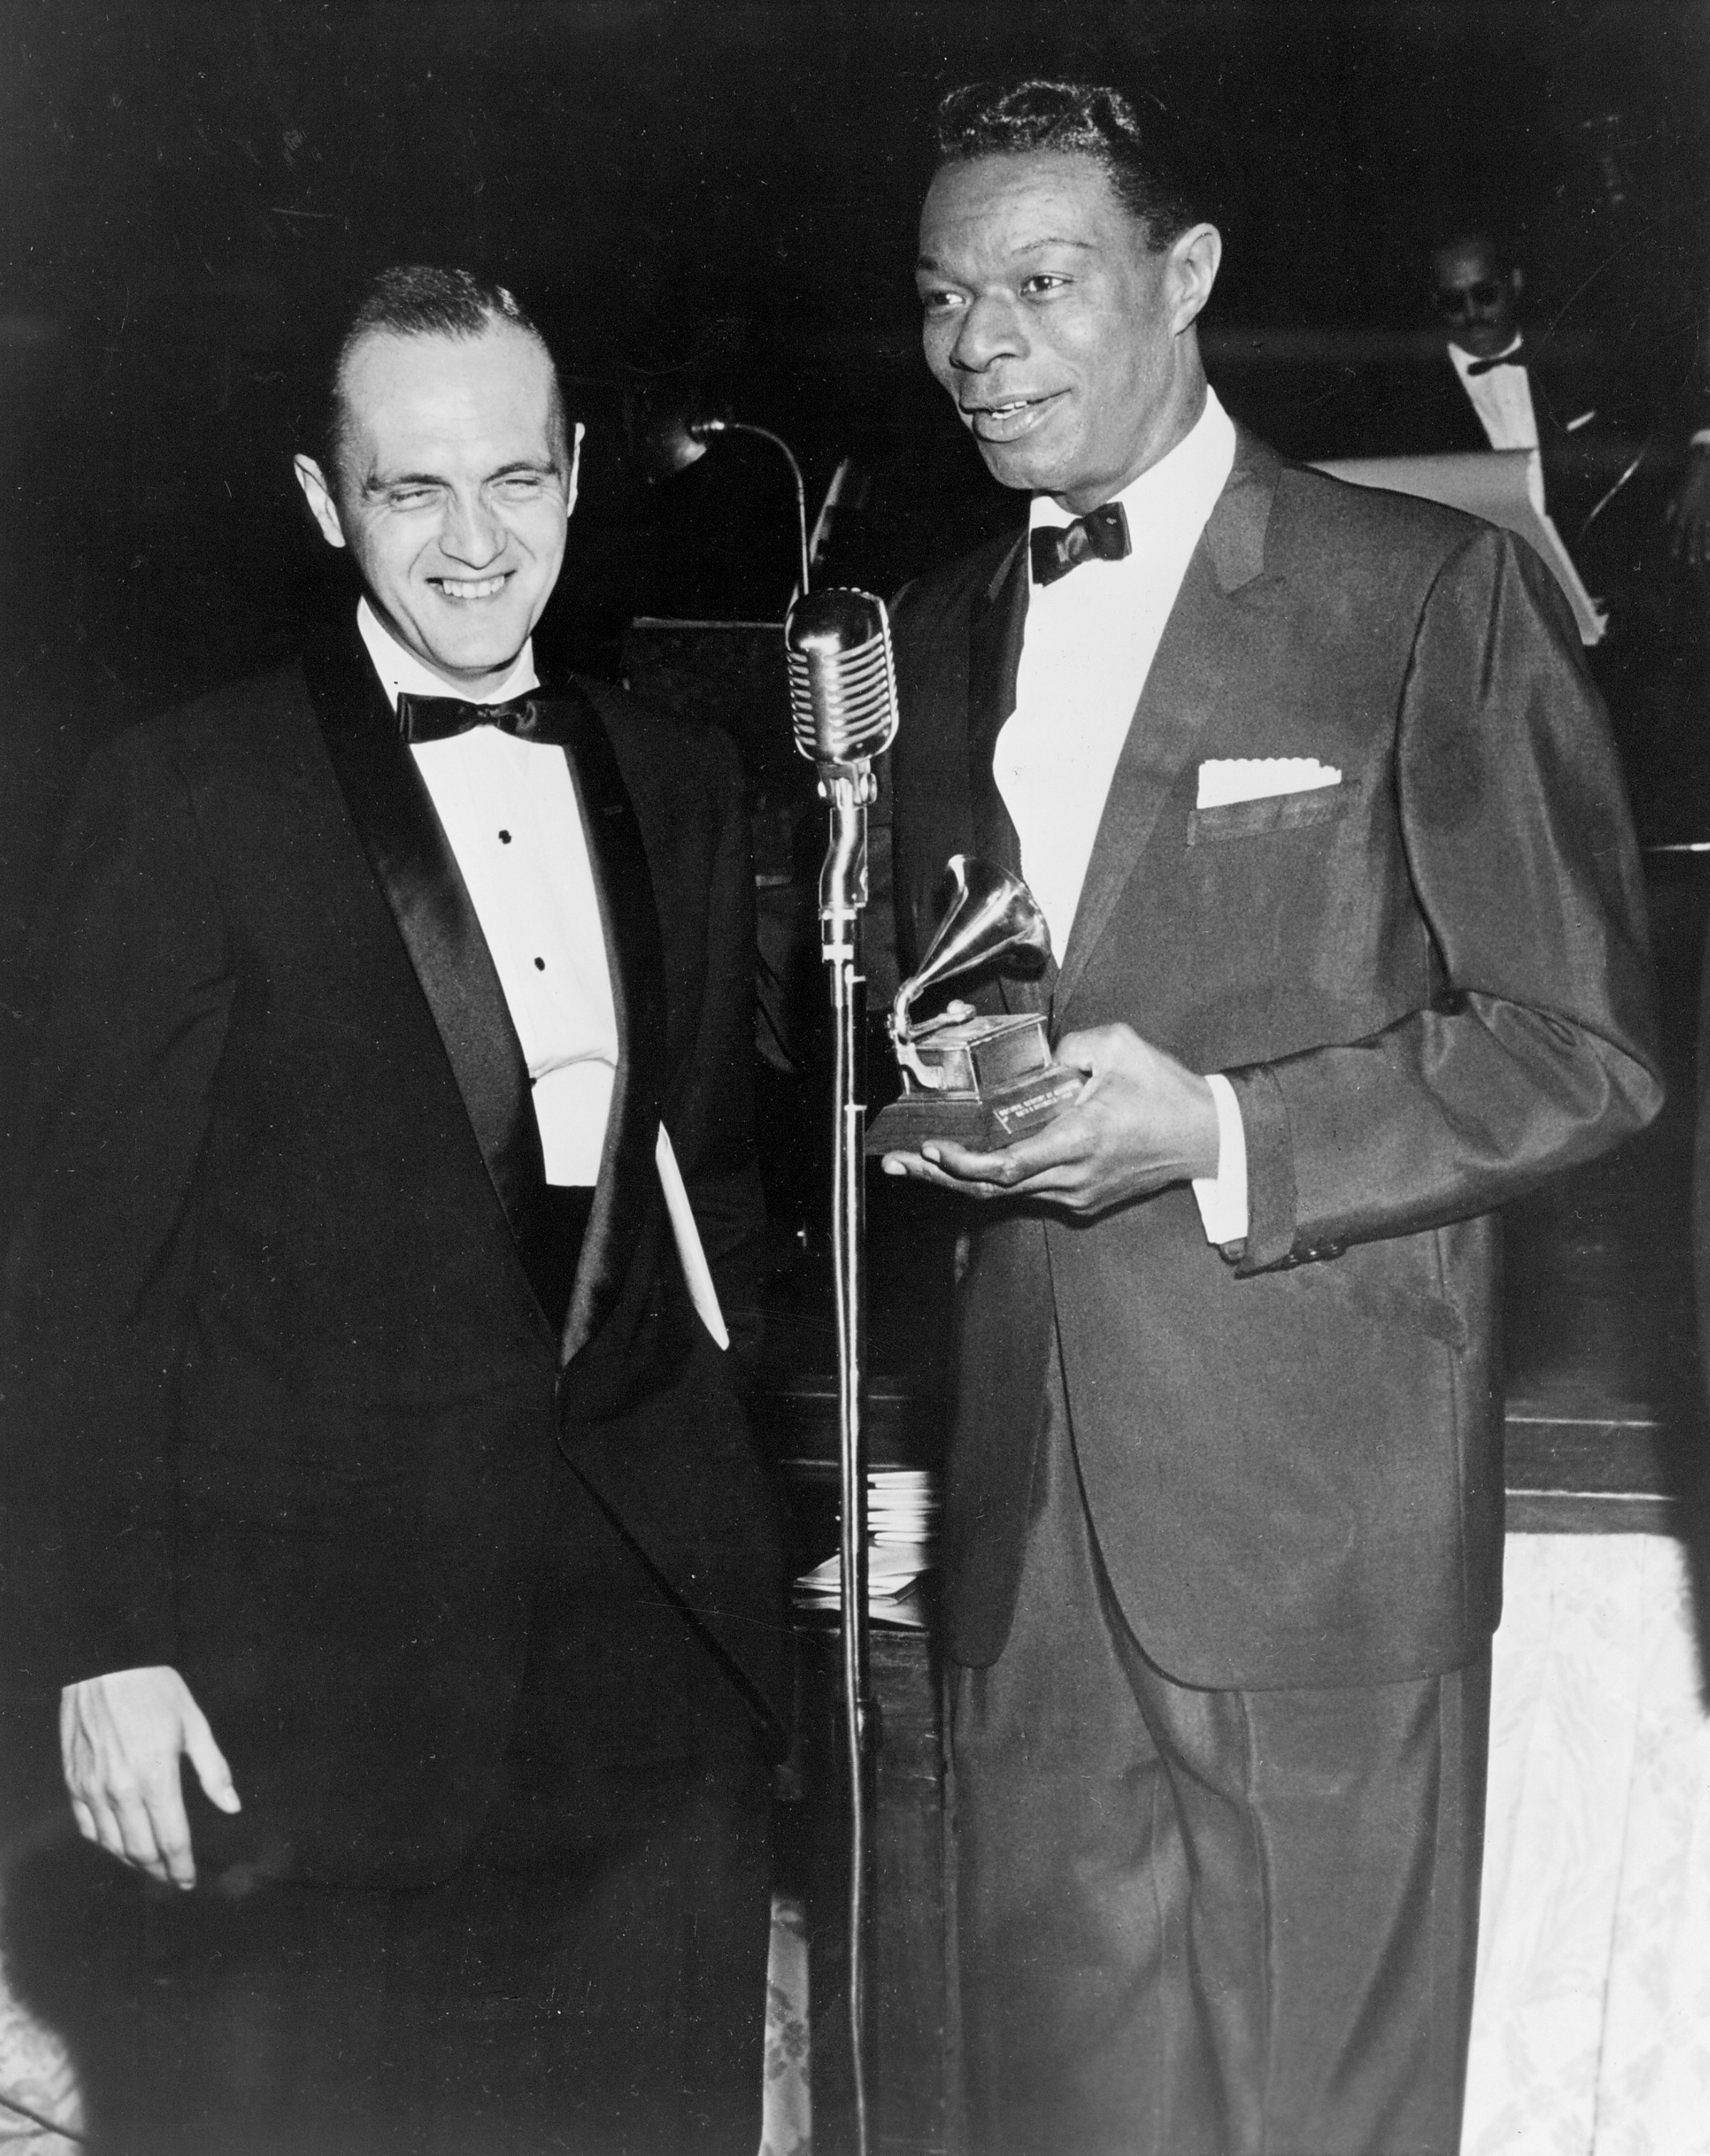 Actor Bob Newhart and singer Nat &quot;King&quot; Cole (holding a Grammy) speak at the microphone during the 1960 Grammy Awards